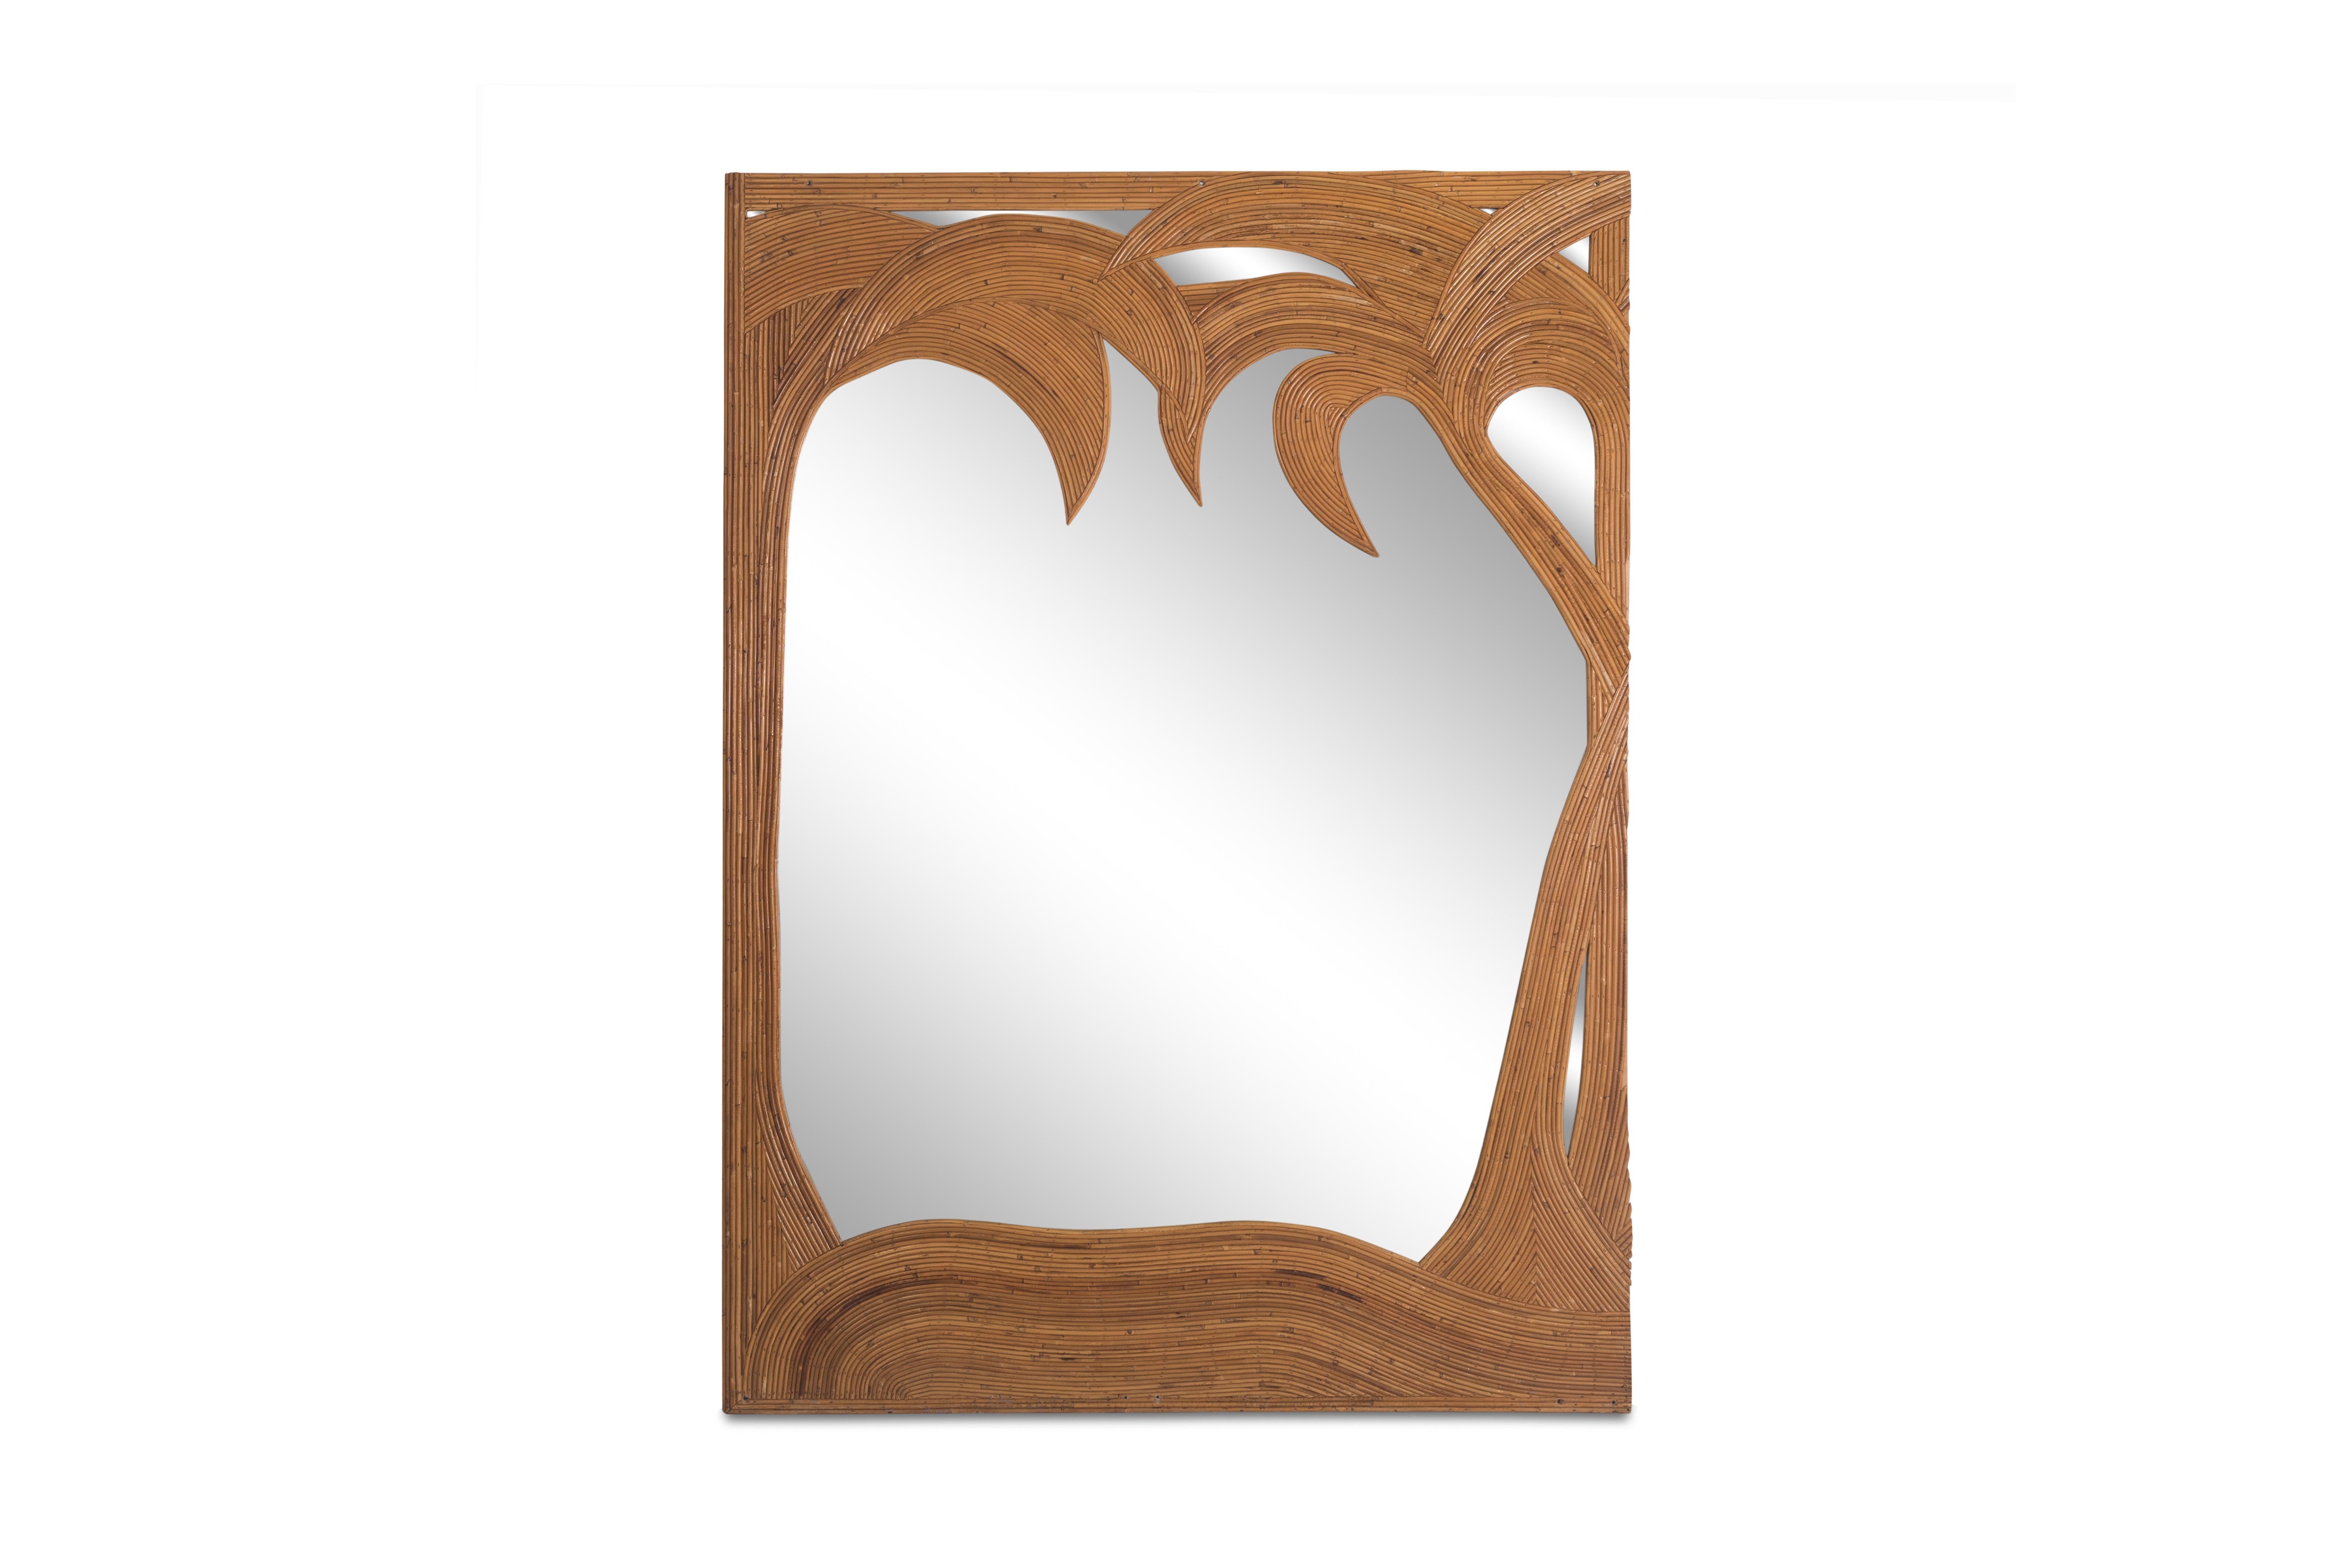 Tropicalism Bamboo mirrored panels by Vivai del Sud. Showing a tropical pattern of palmtrees, cladded in bamboo, giving these items a very warm appearance. The mirrors can either be hanged on the wall or be placed on the floor.

Would fit well in